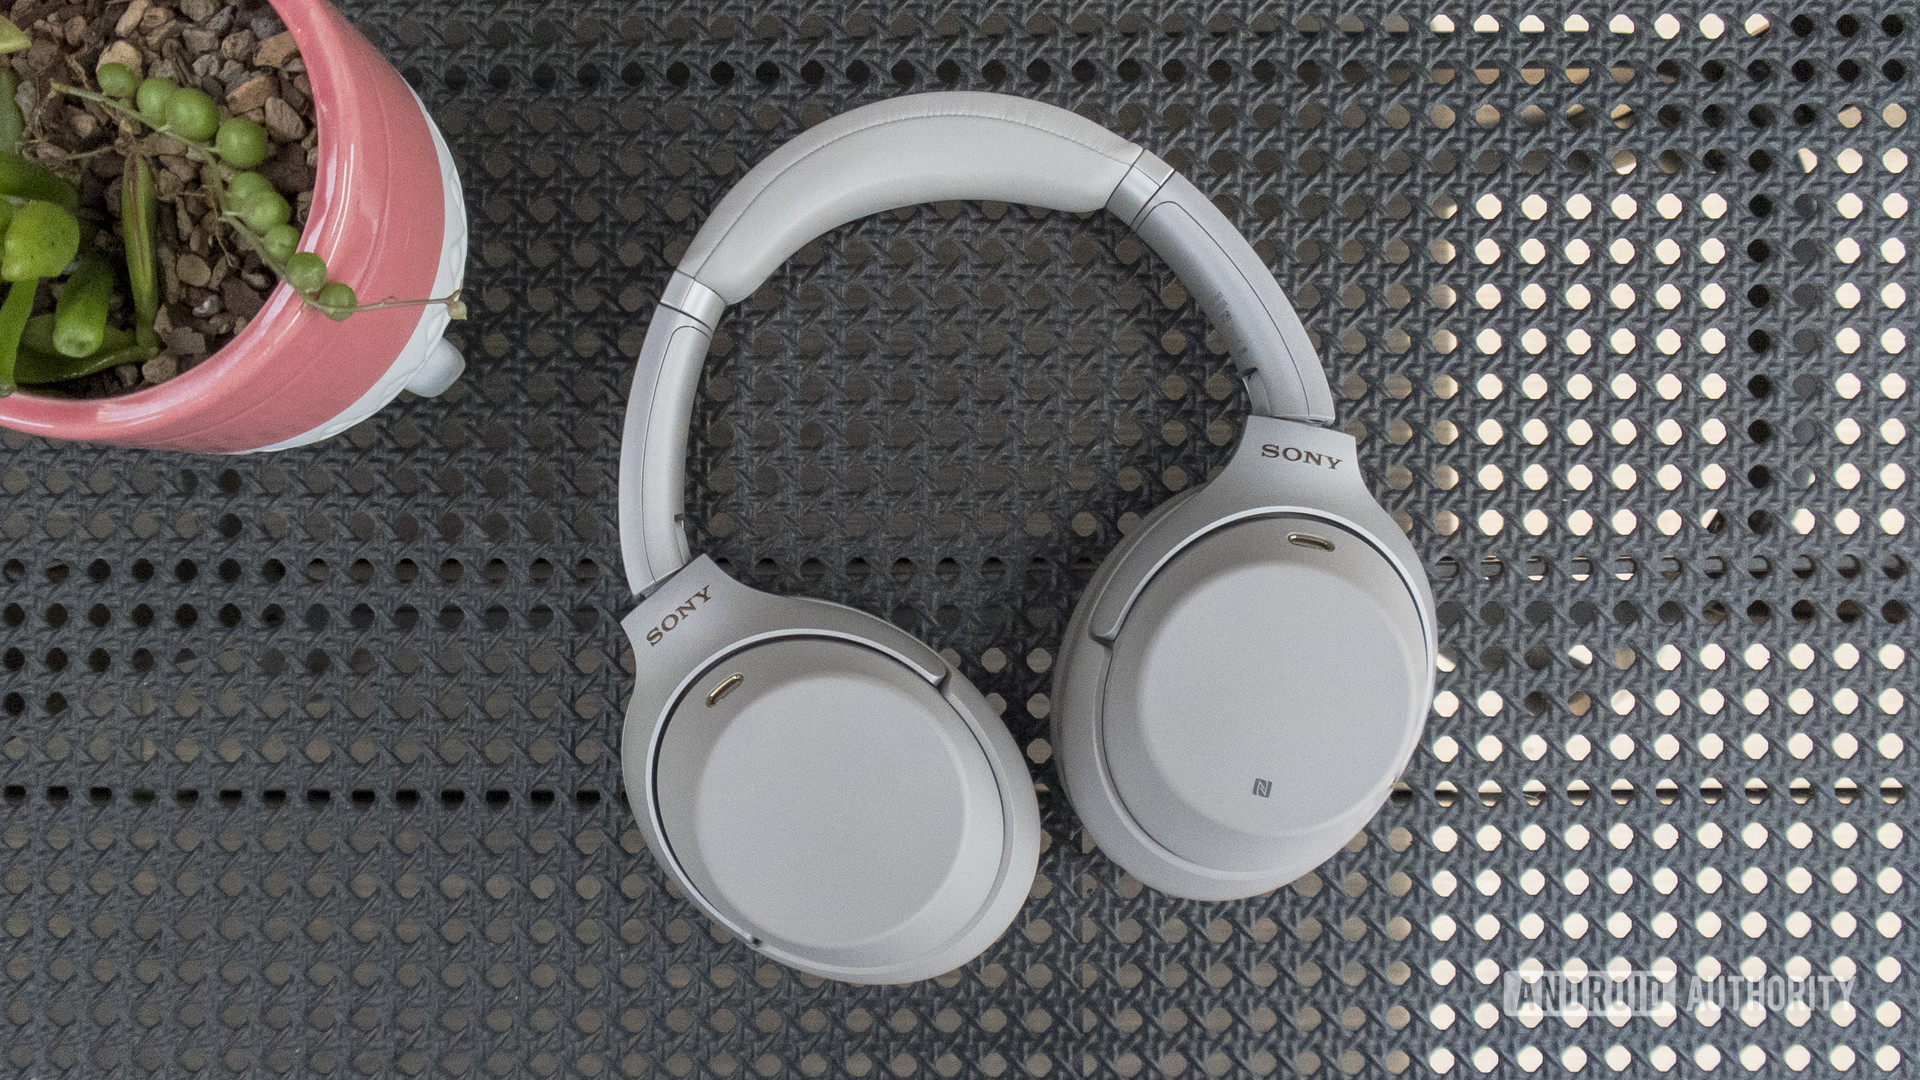 An image of the Sony WH-1000XM3 Wireless Noise-Canceling Headphones.